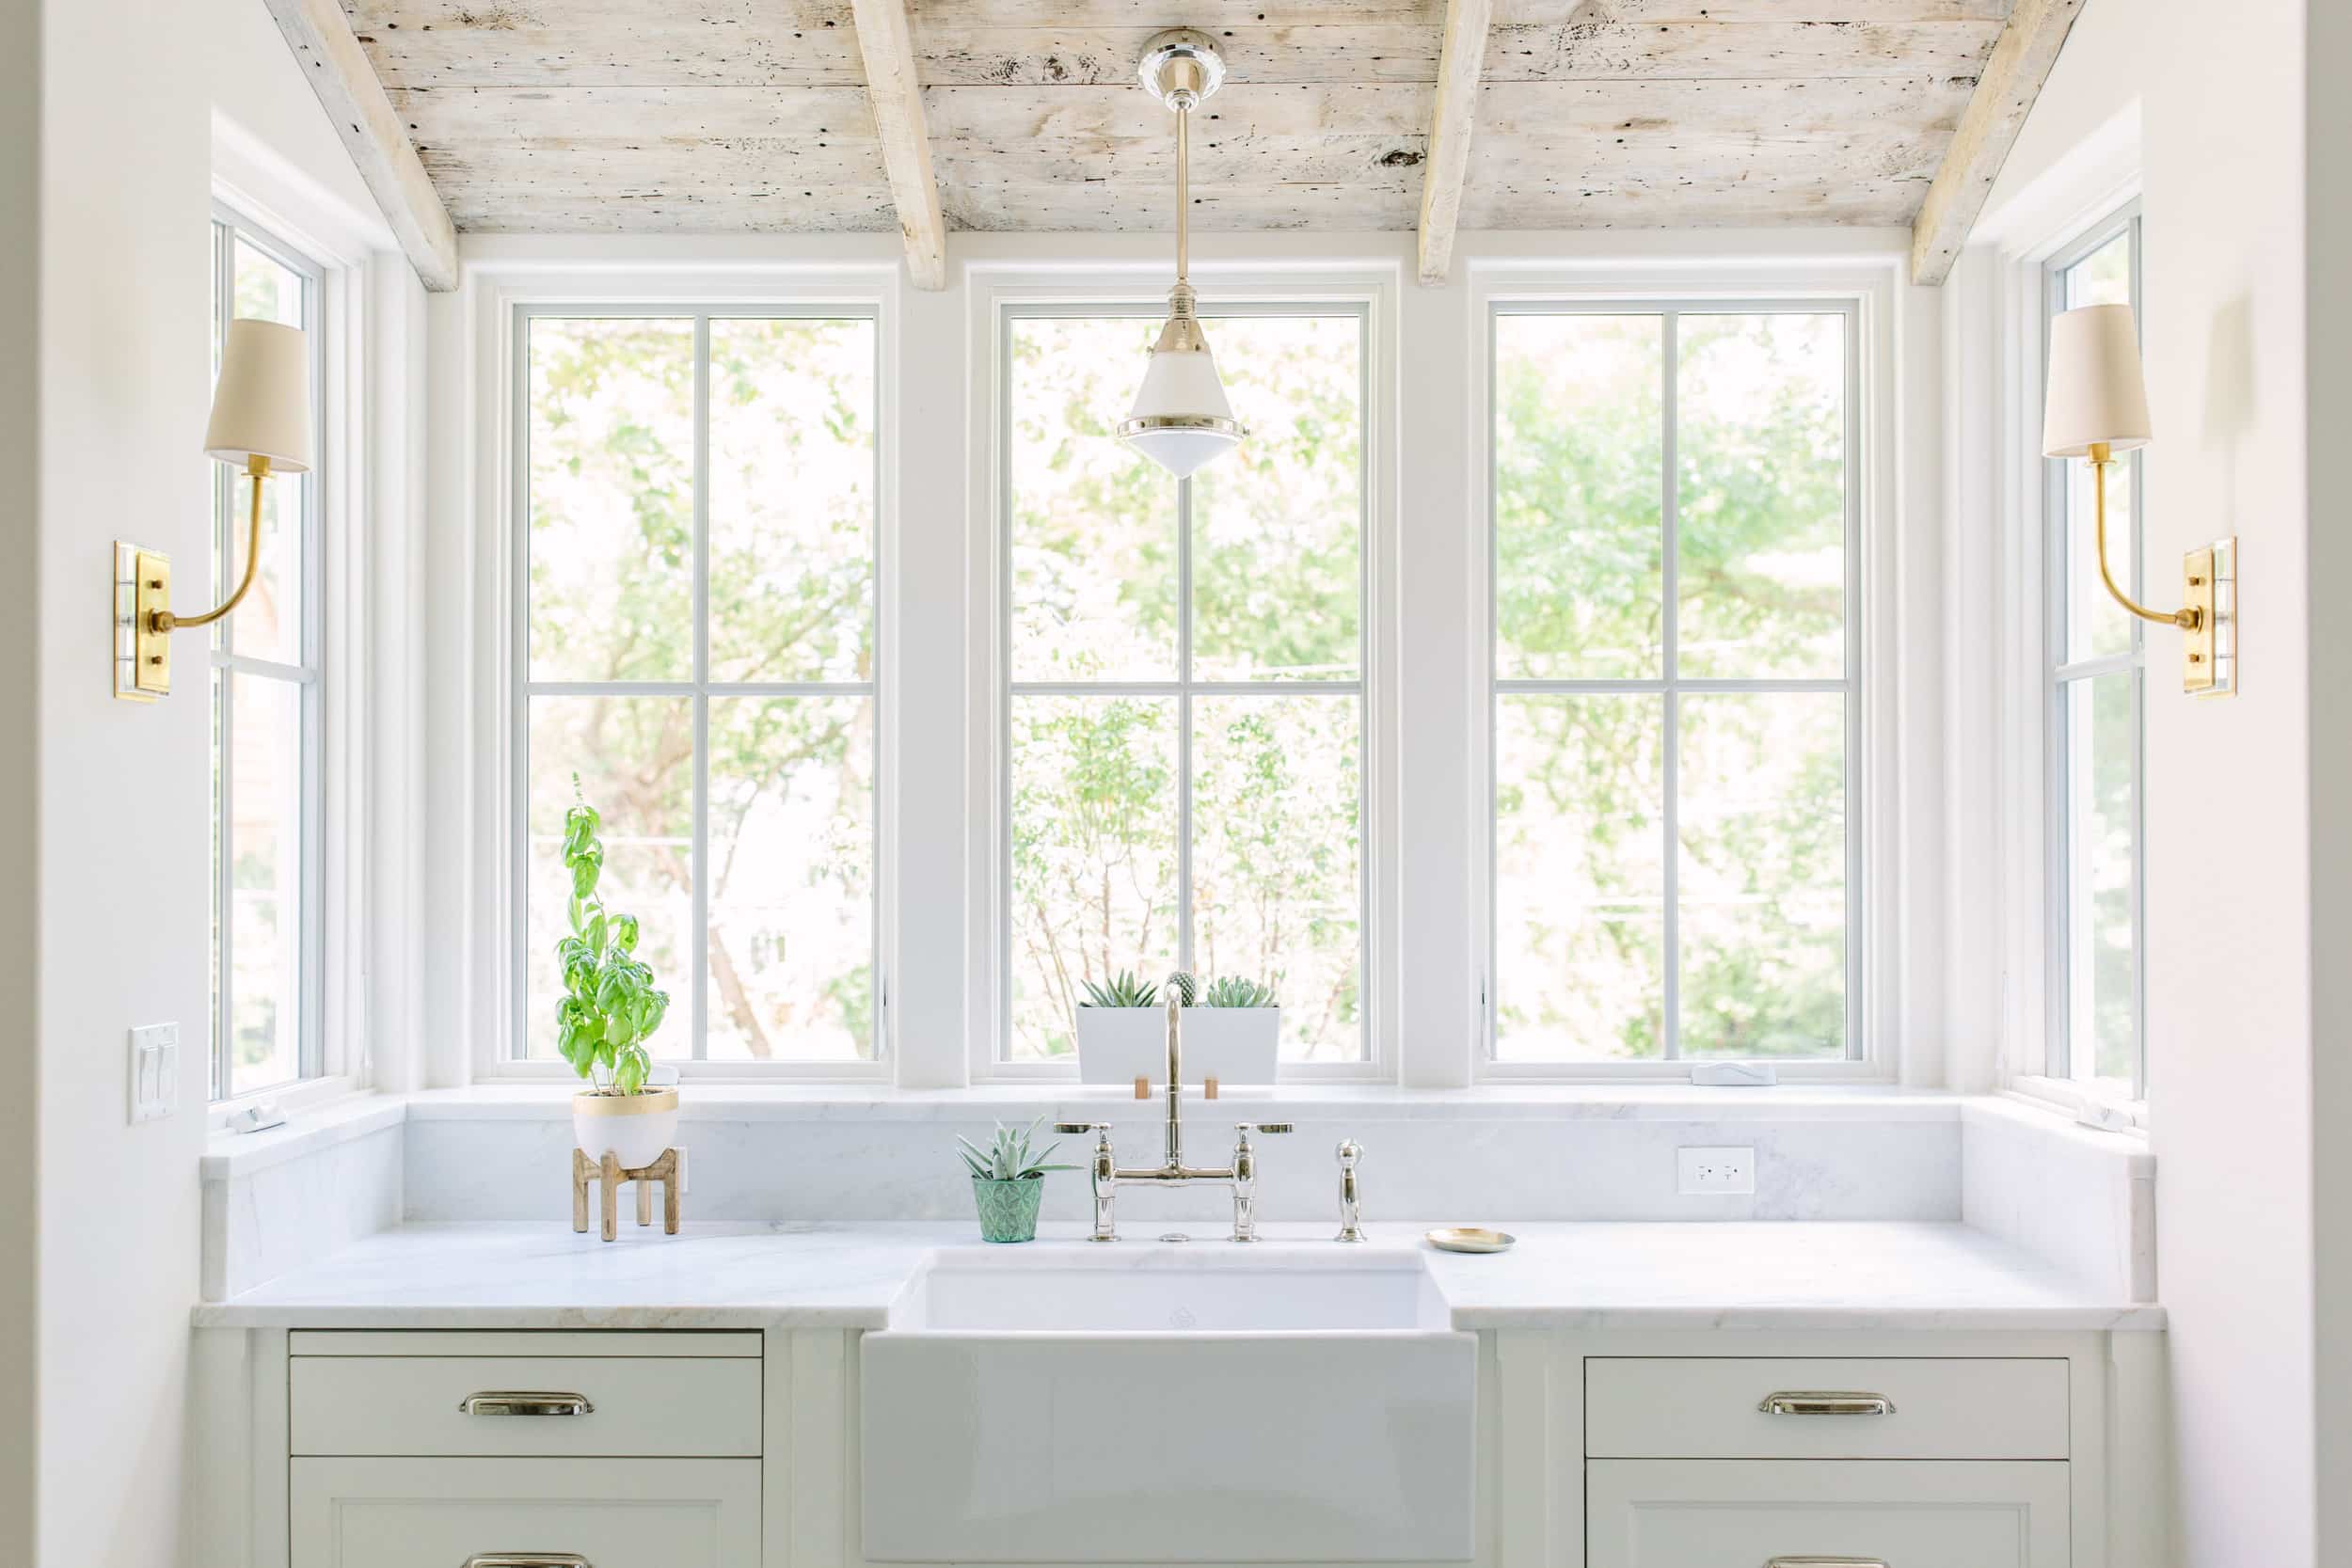 Alt tag for white-modern-open-kitchen-sink-window-light-white-washed-wood-ceiling-cococozy-katemarkerinteriors